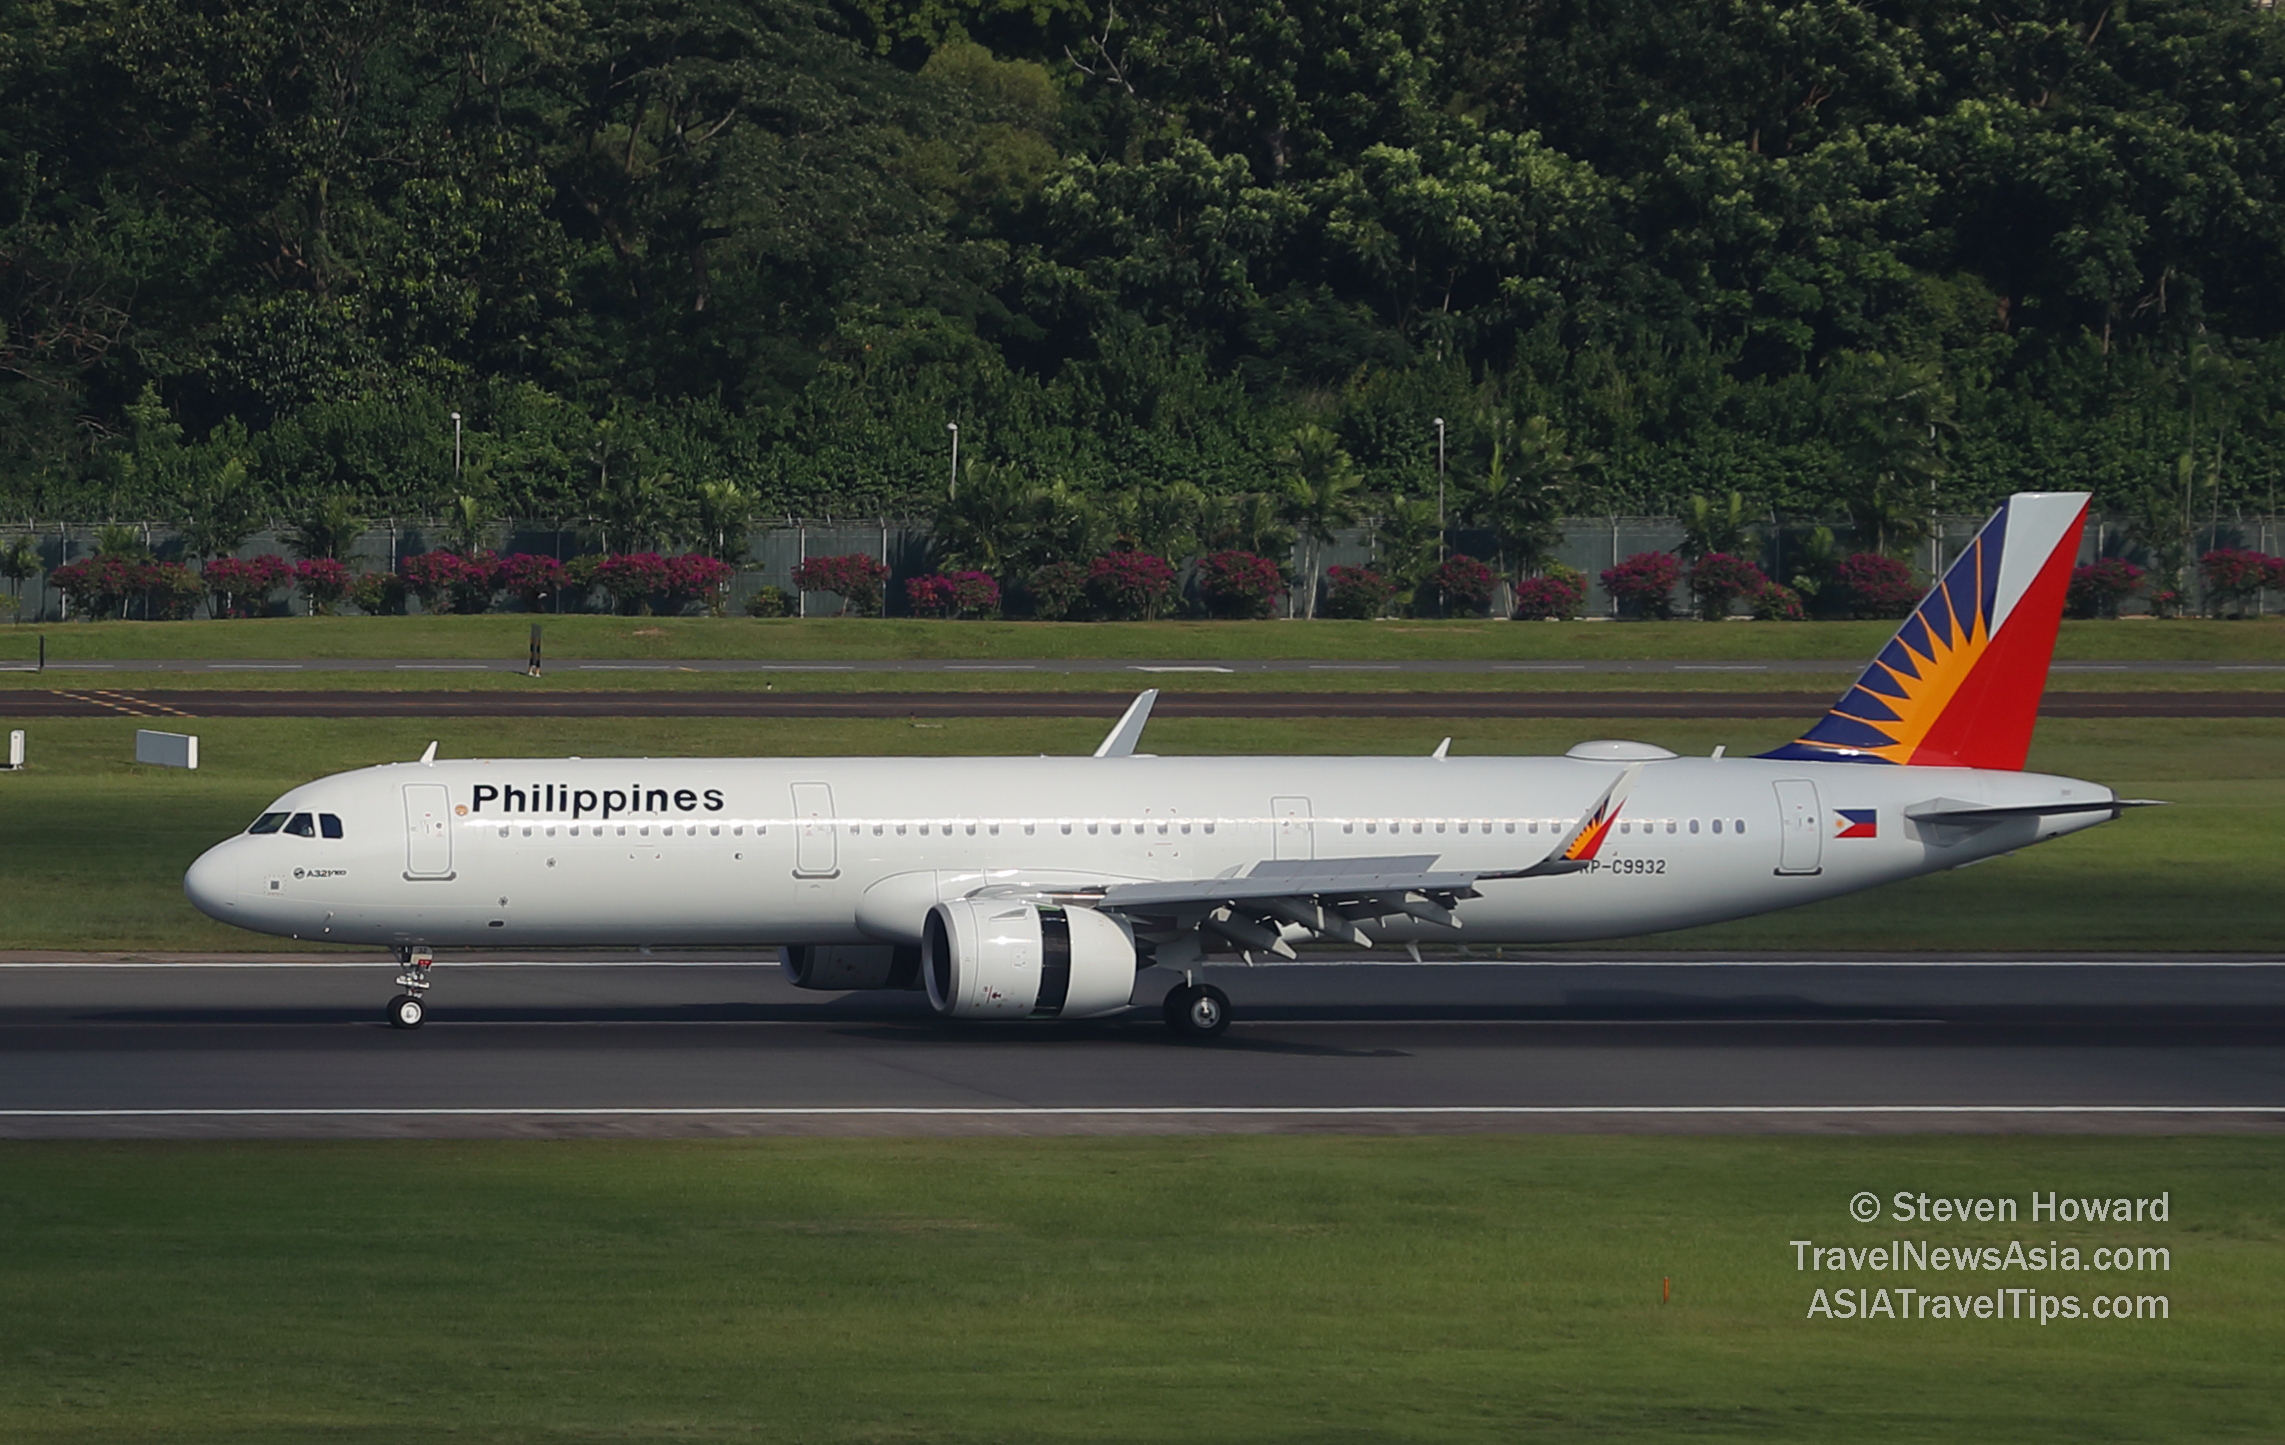 Philippine Airlines Airbus A321 reg: RP-C9932. Picture by Steven Howard of TravelNewsAsia.com Click to enlarge.